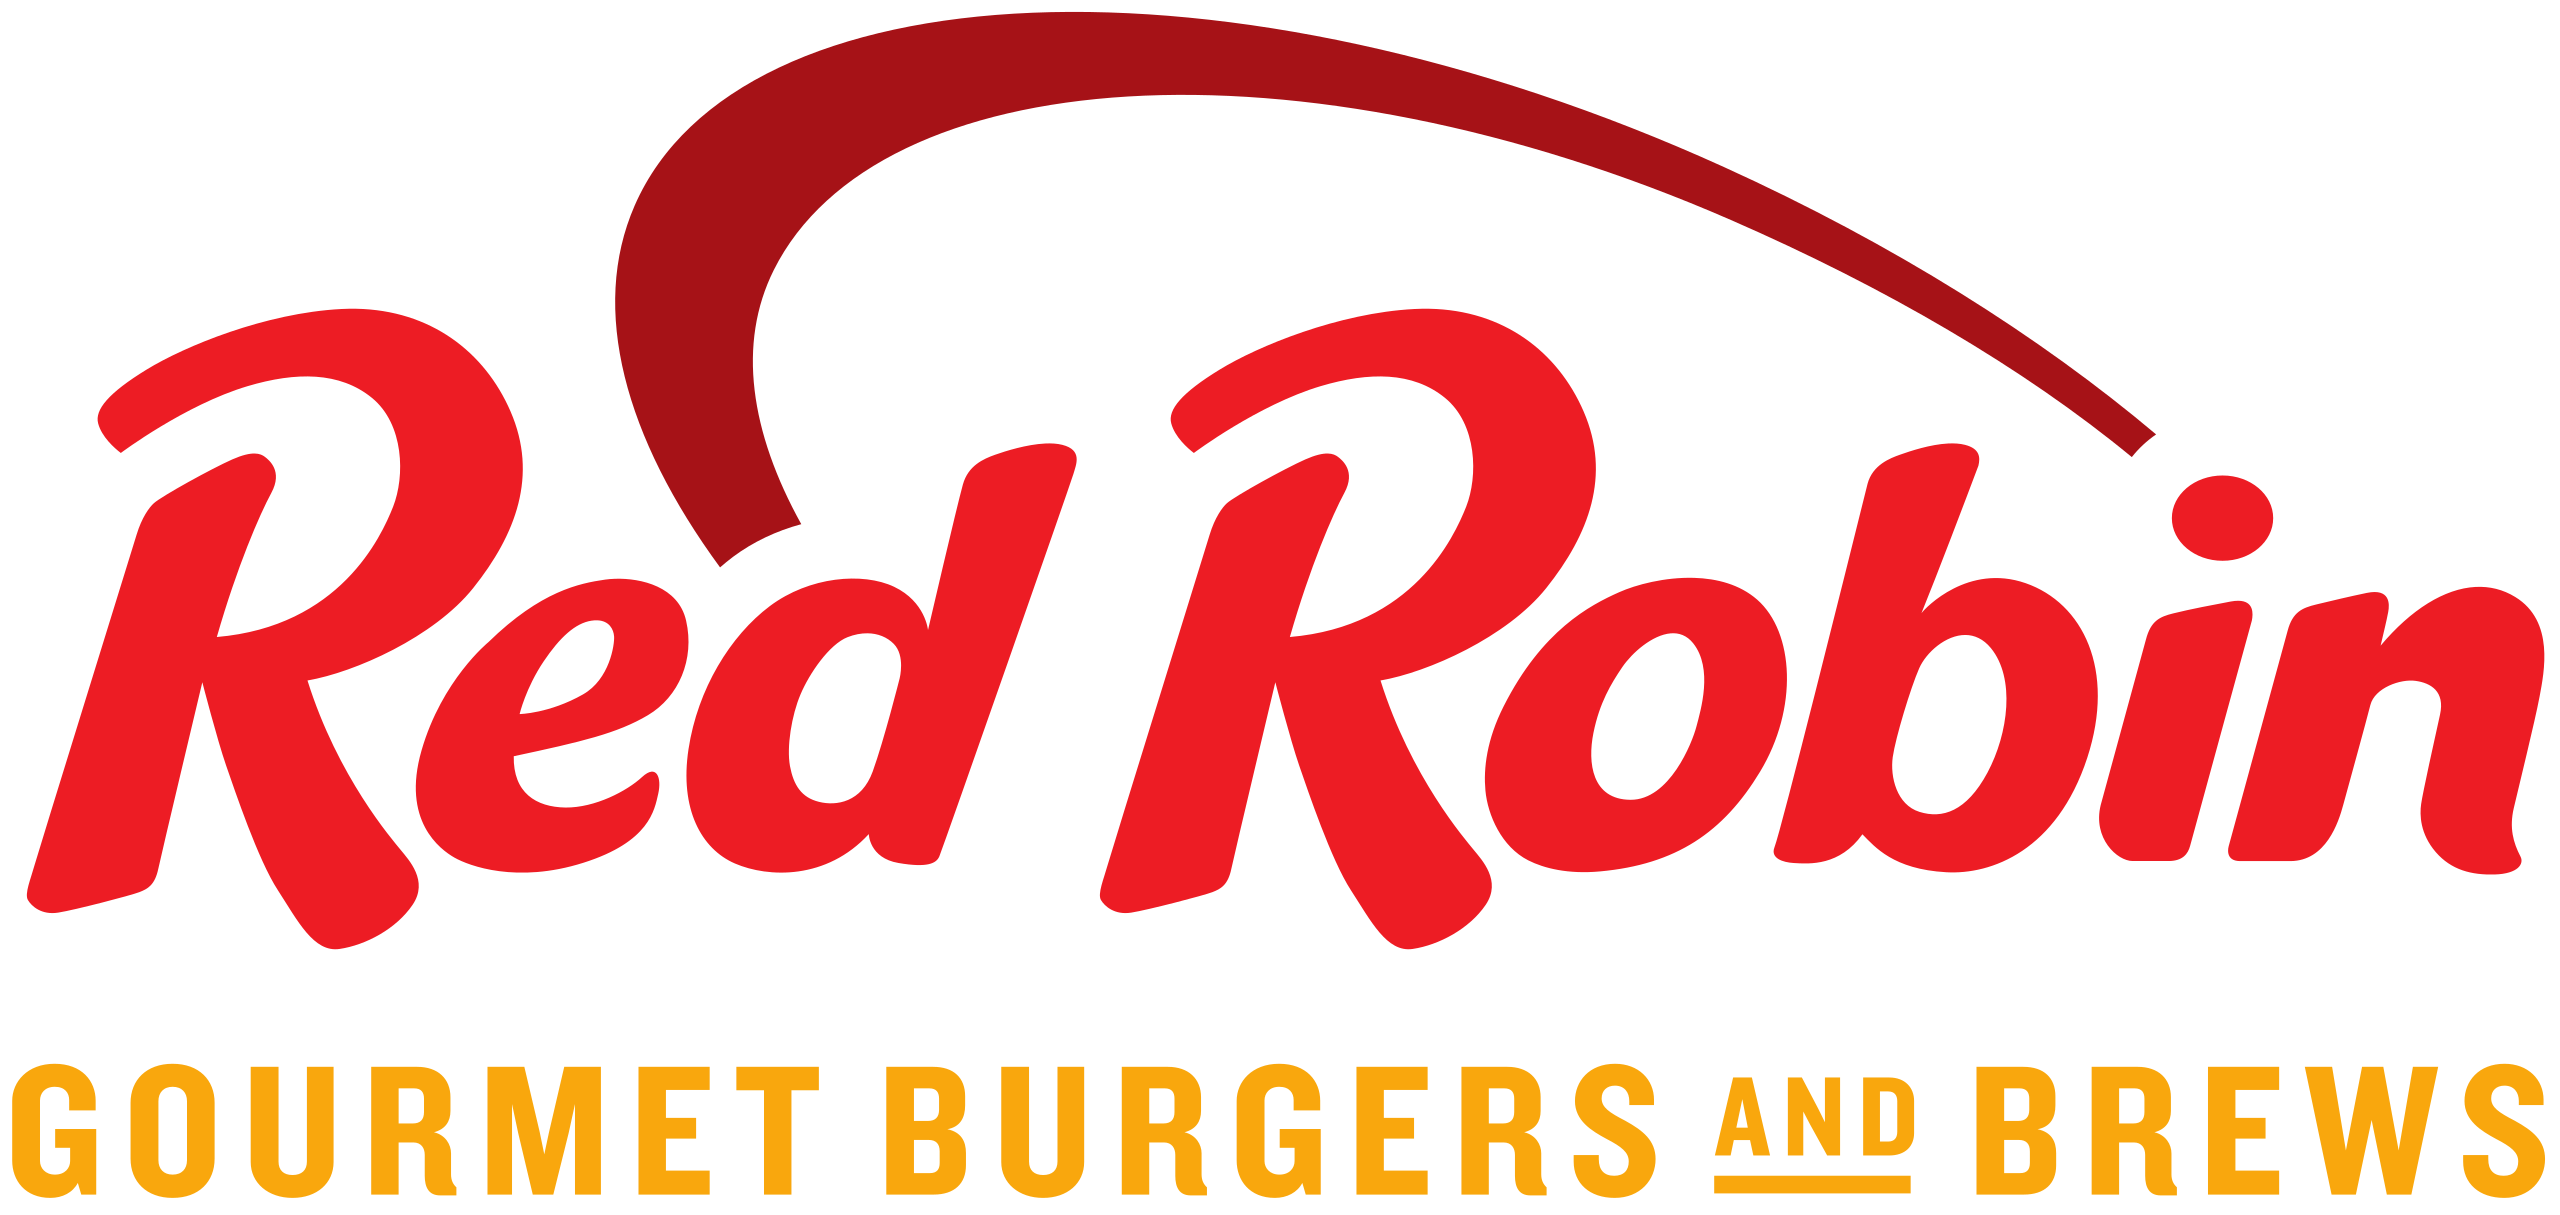 Red Robin | Get a birthday burger when you join their royalty program